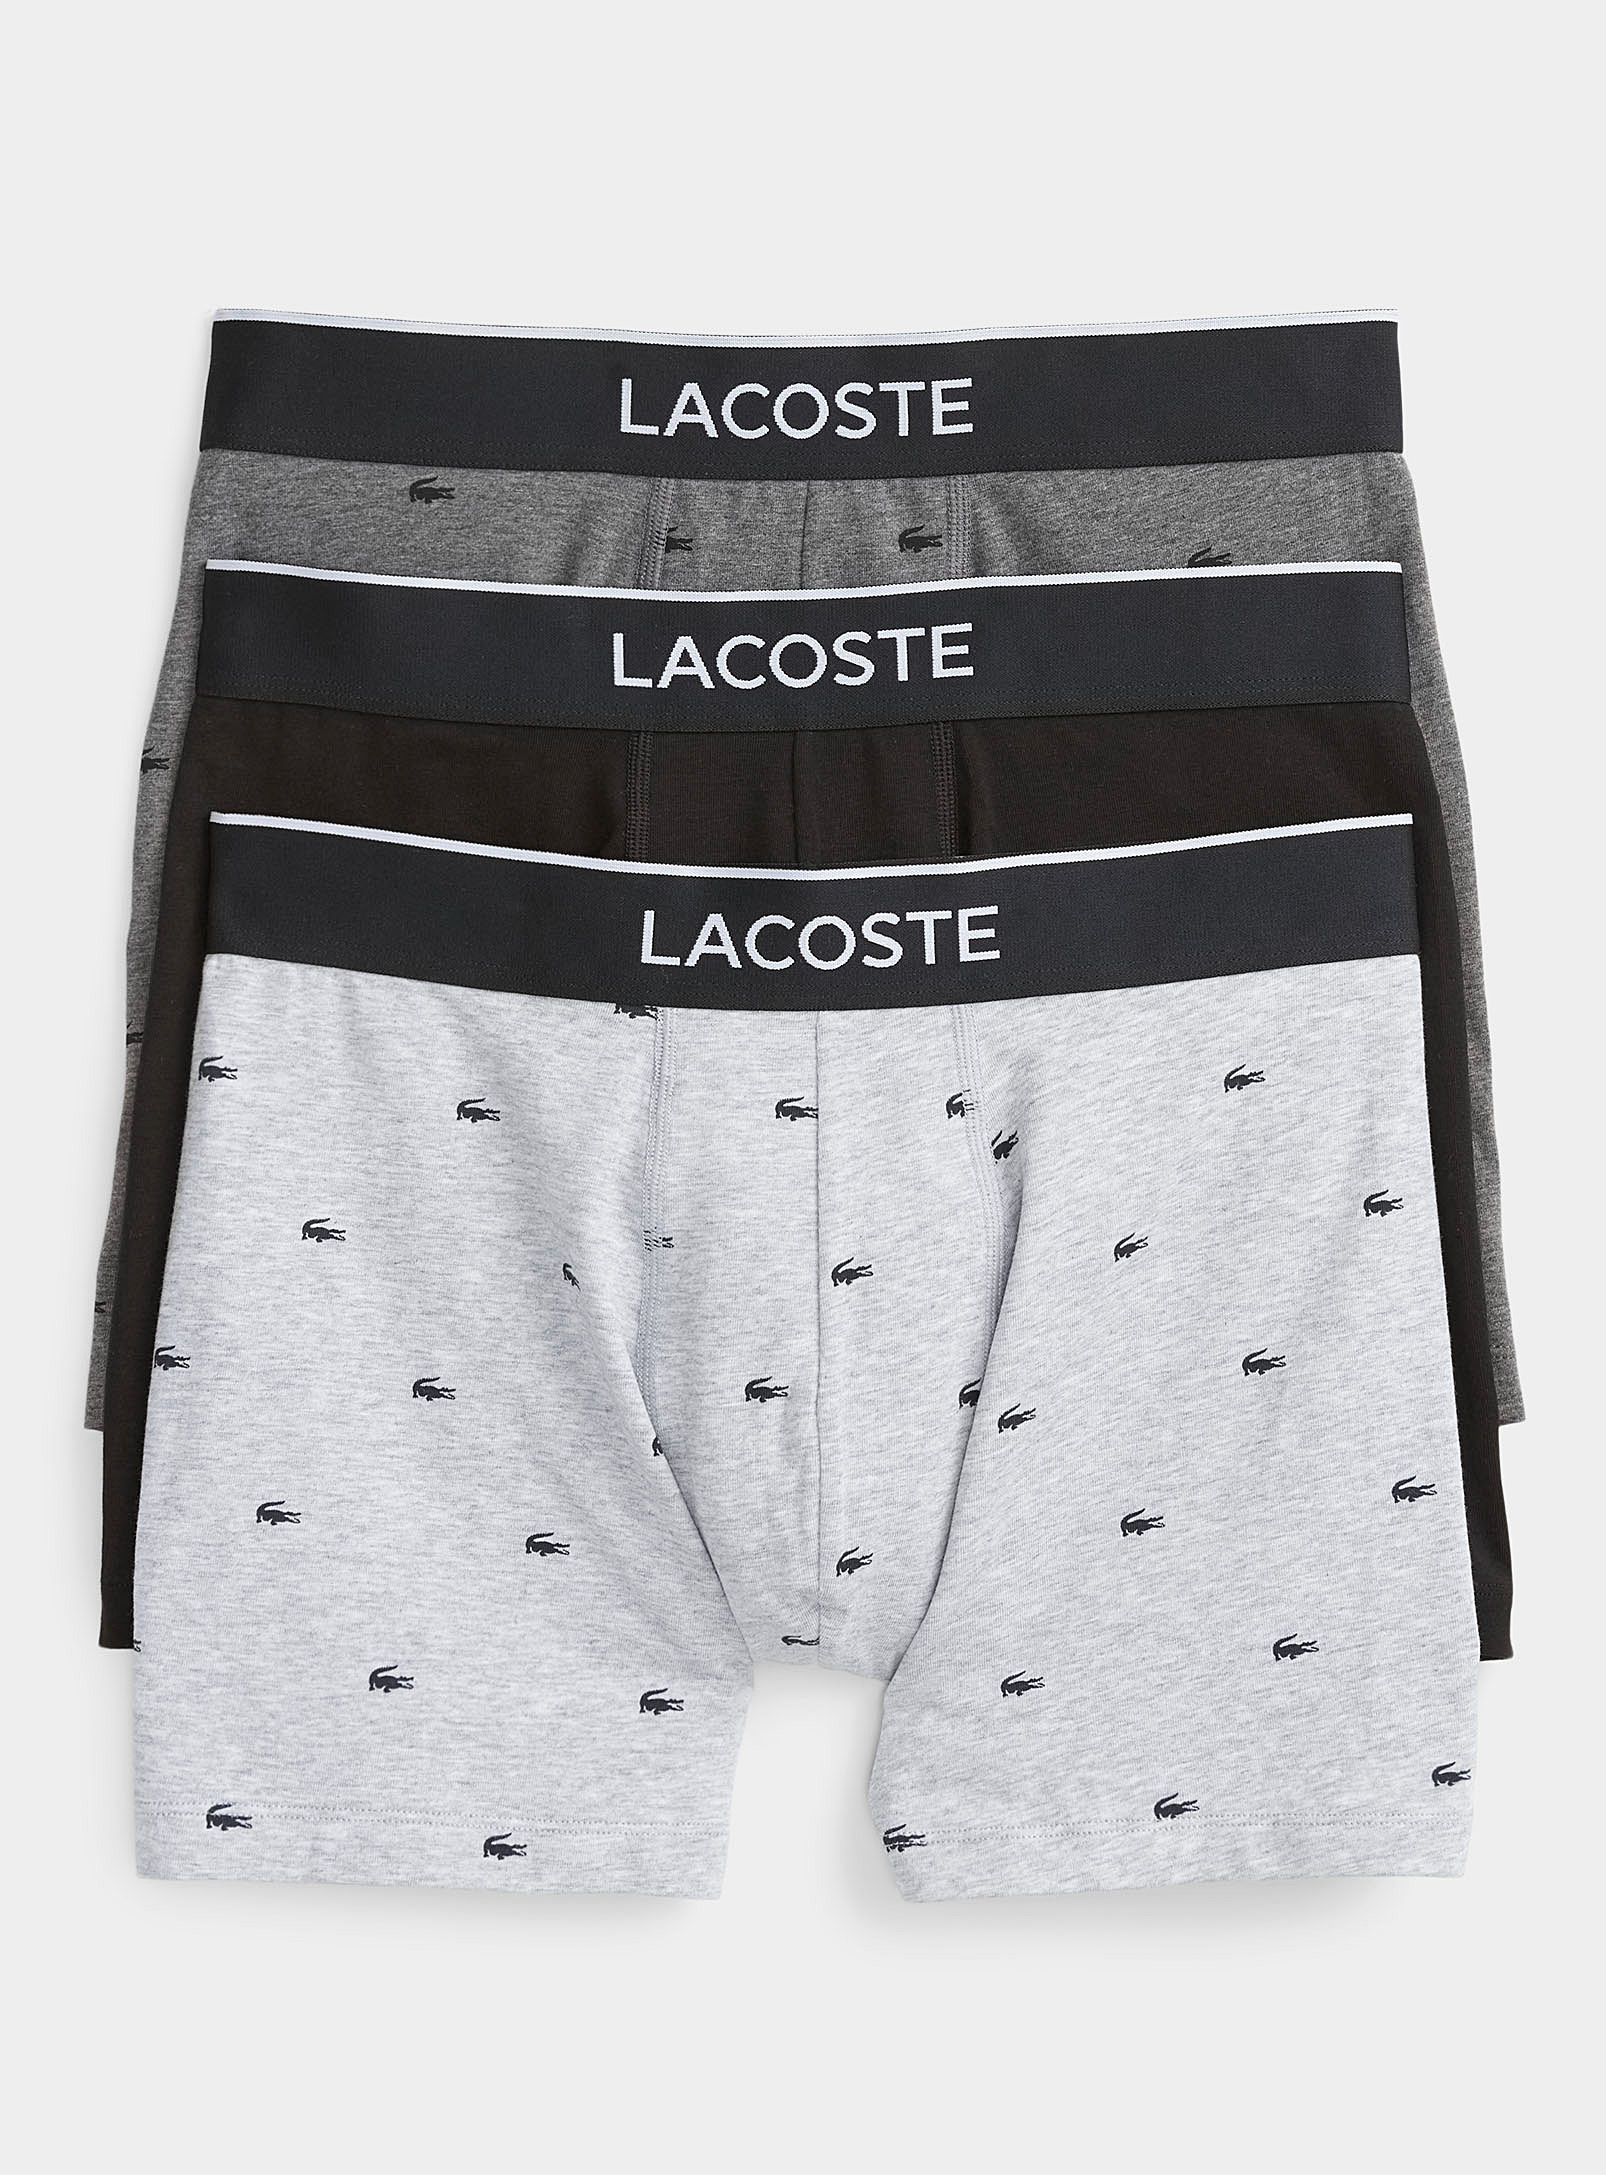 Lacoste Mini-croc Boxer Briefs 3-pack In Patterned Grey